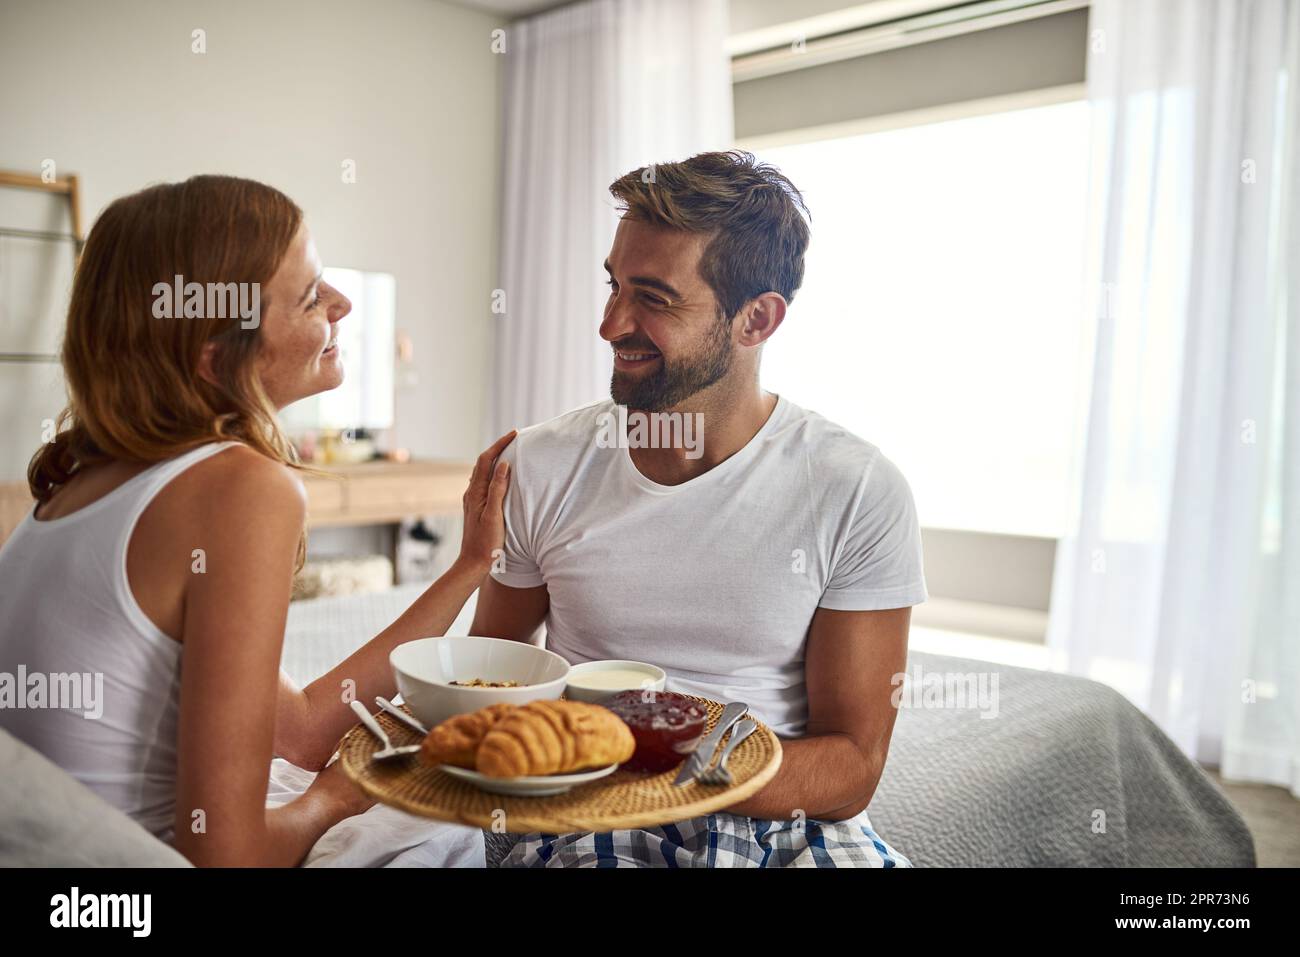 Romance is, breakfast in bed. Shot of a happy young couple enjoying breakfast in bed together at home. Stock Photo